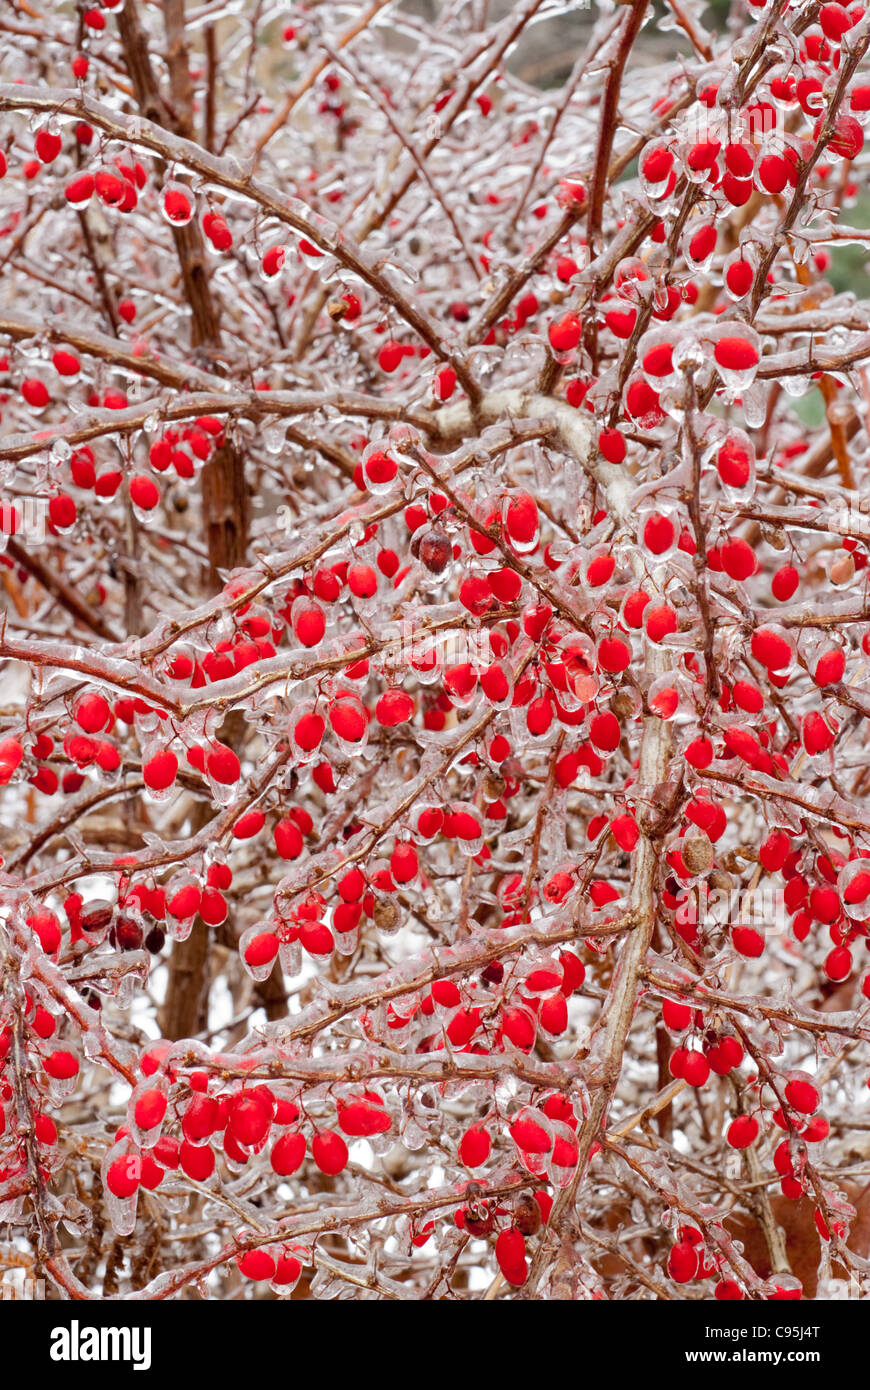 Red berries in winter ice snow growing outside on Barberry plant Berberis thunbergii berry food wildlife birds entire frame Stock Photo